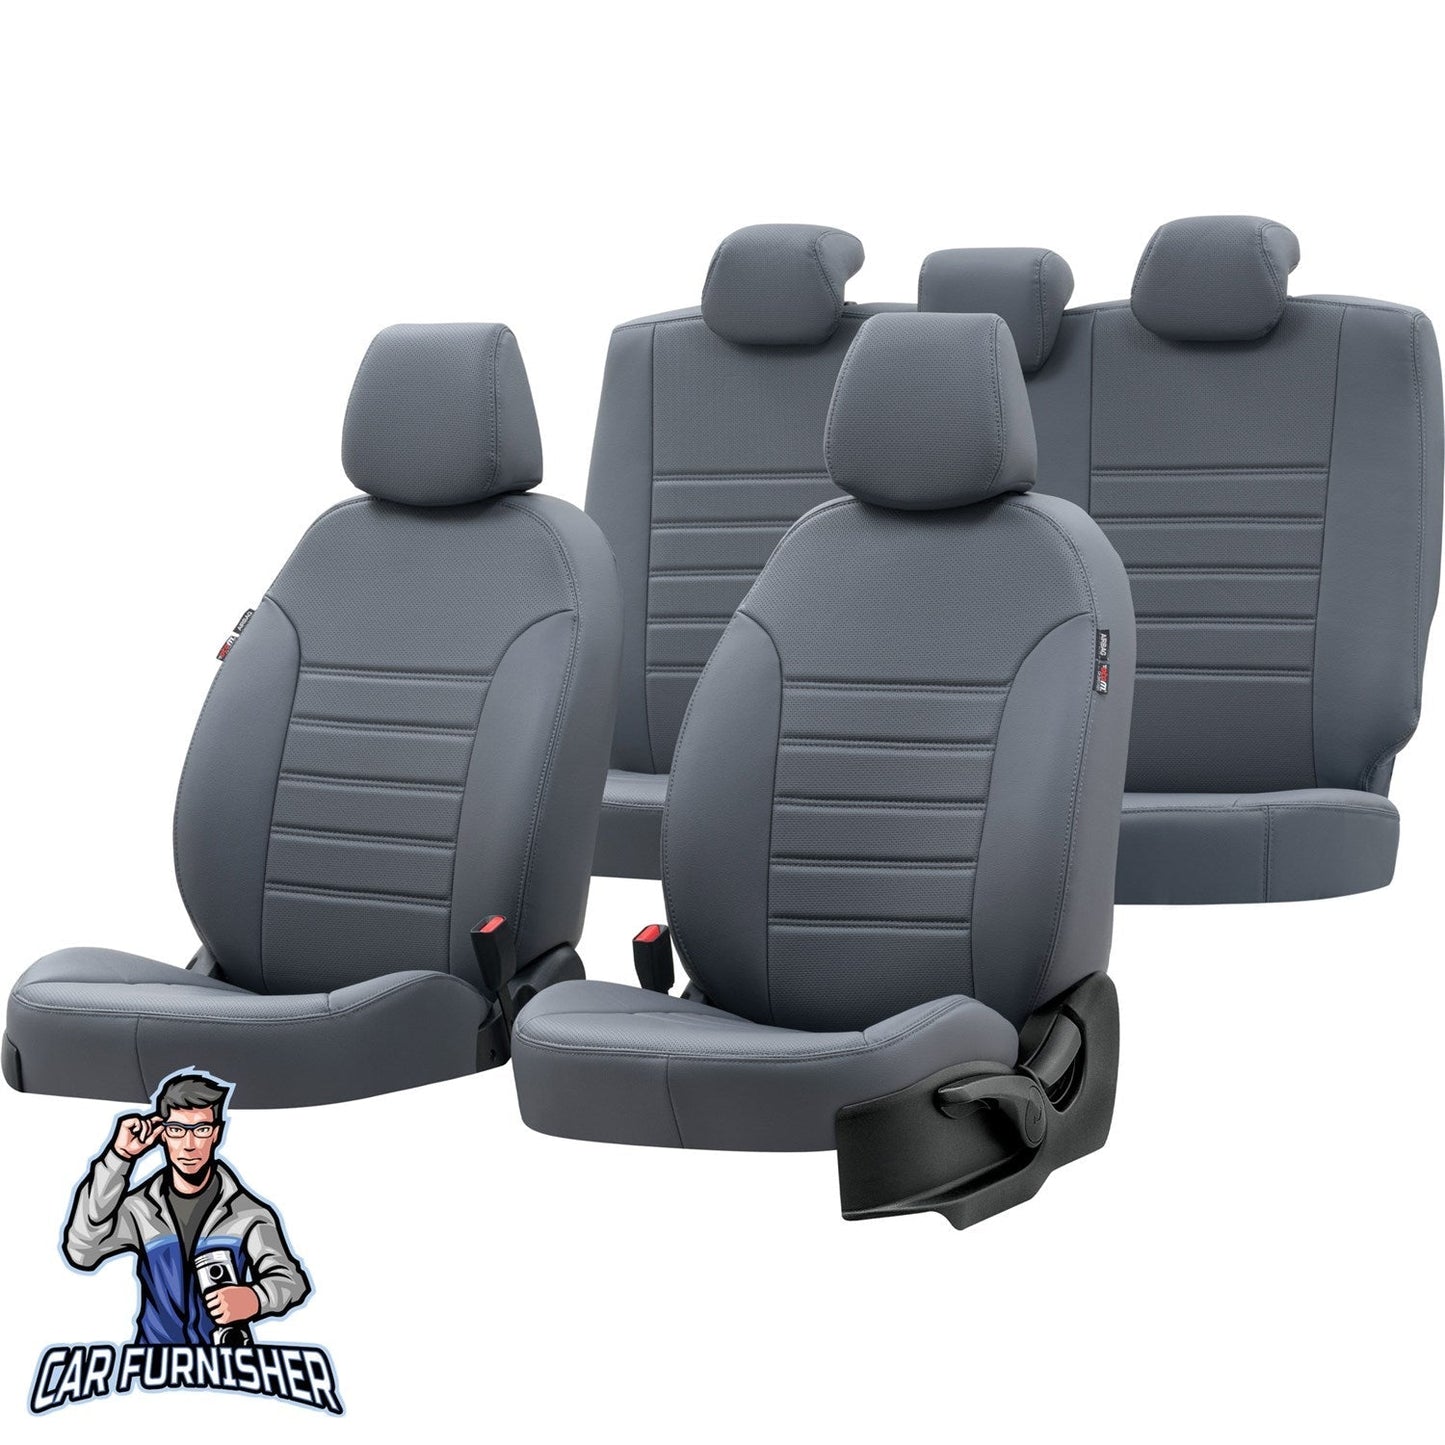 Fiat Bravo Seat Covers New York Leather Design Smoked Leather